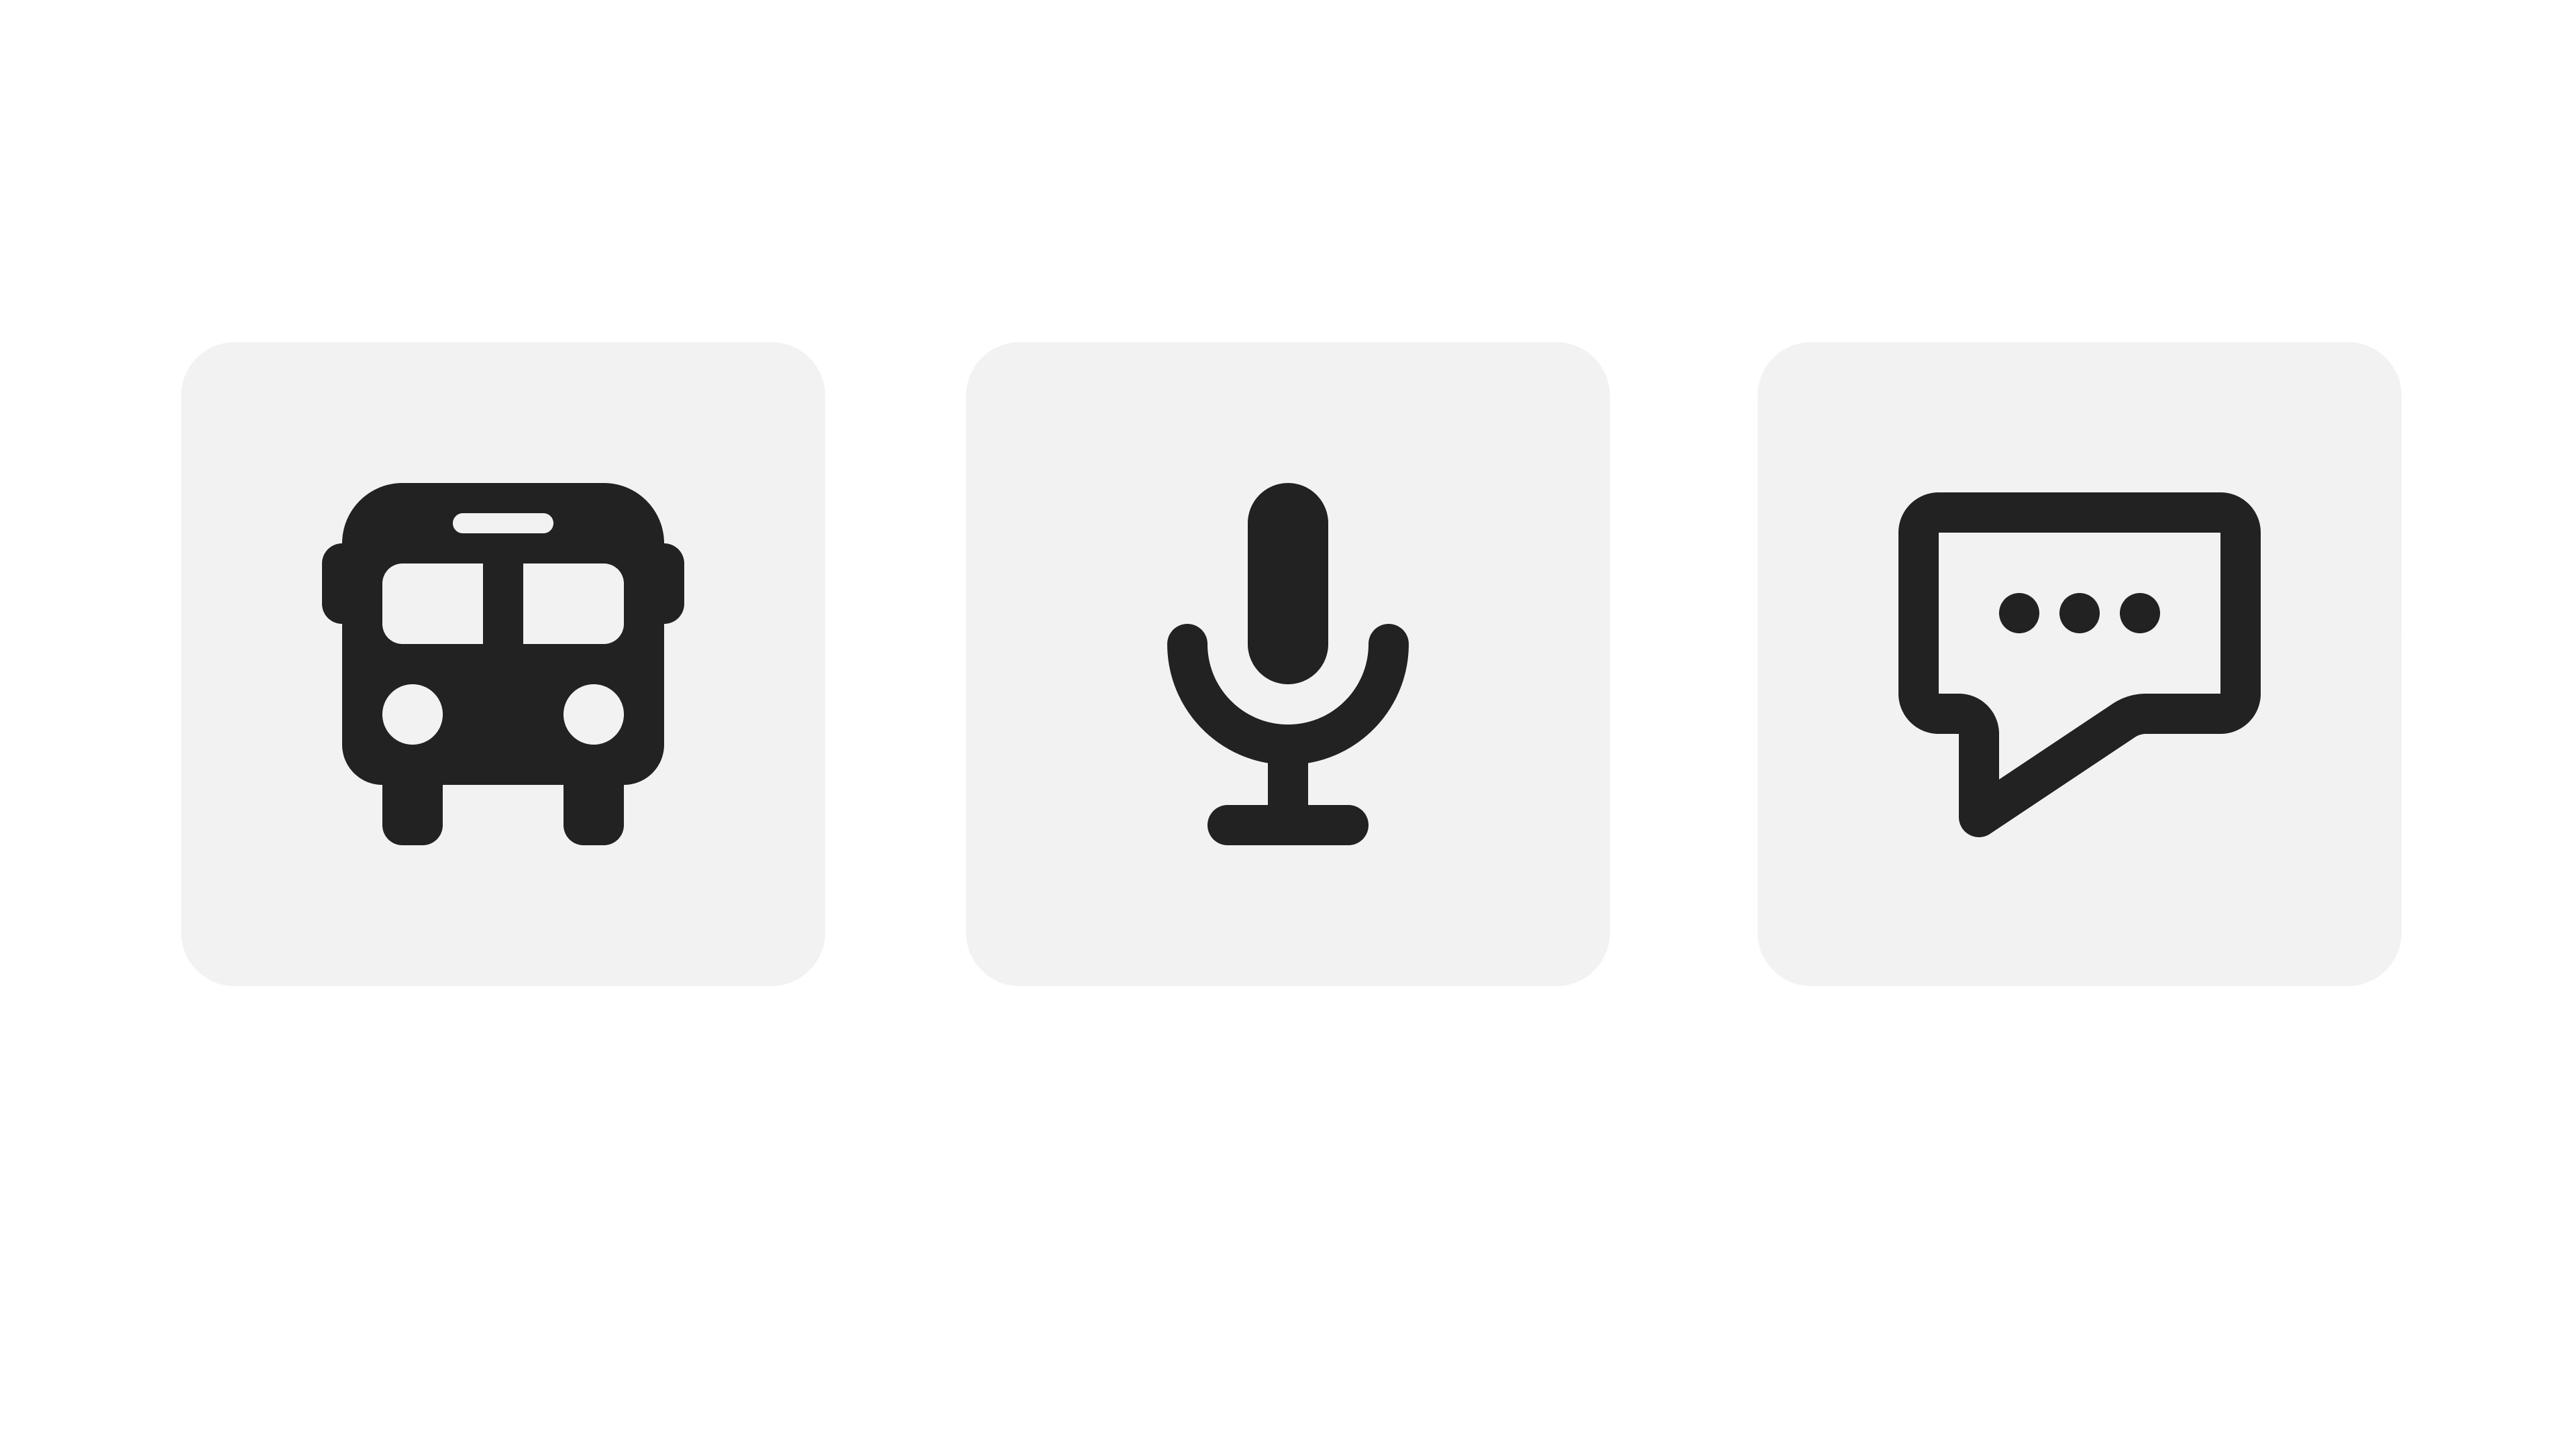 What_search_terms_would_you_use_for_these_icons.png